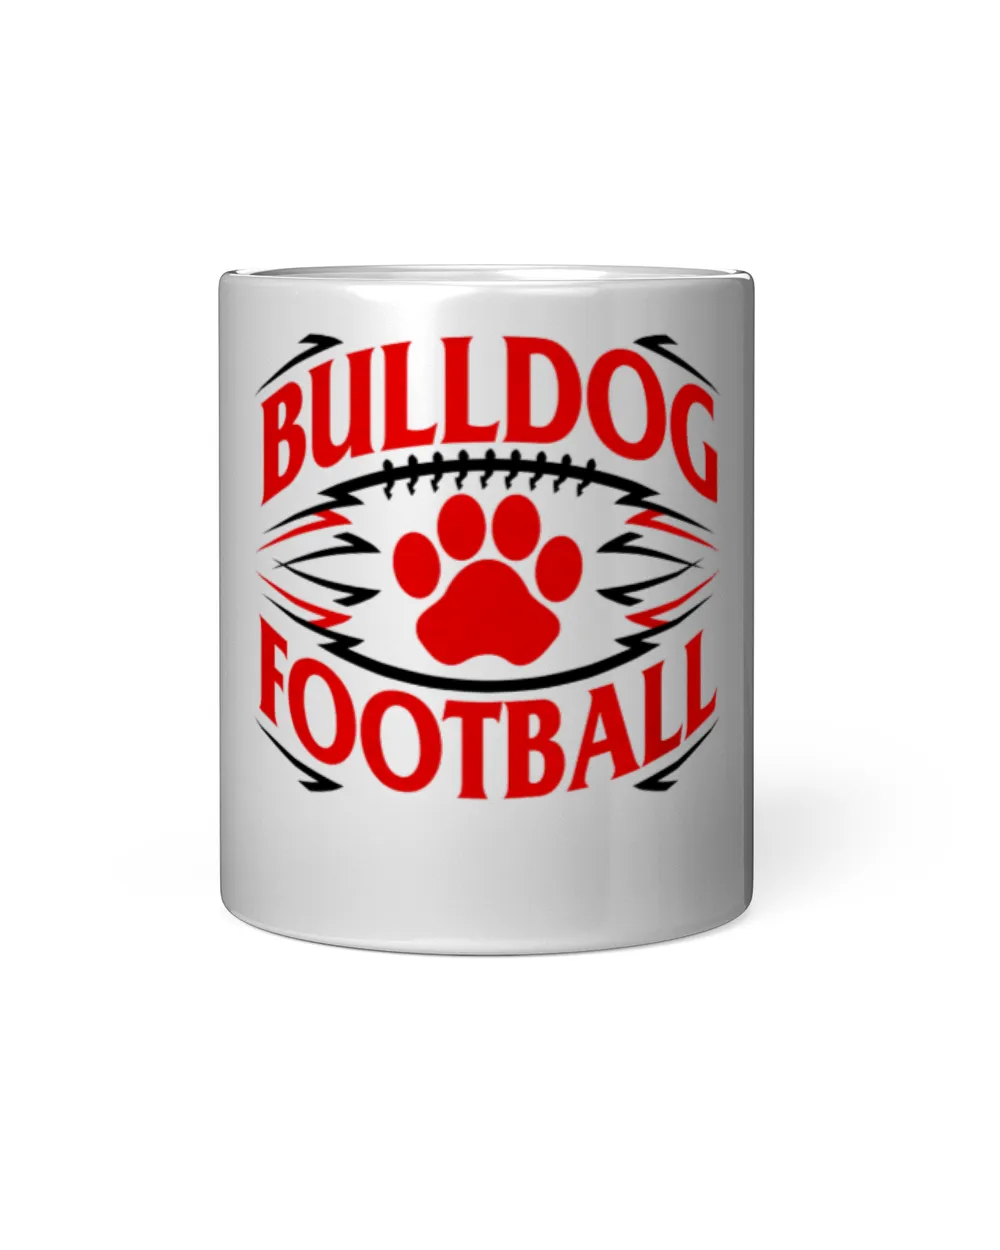 Bulldog for Sports and Football Fans